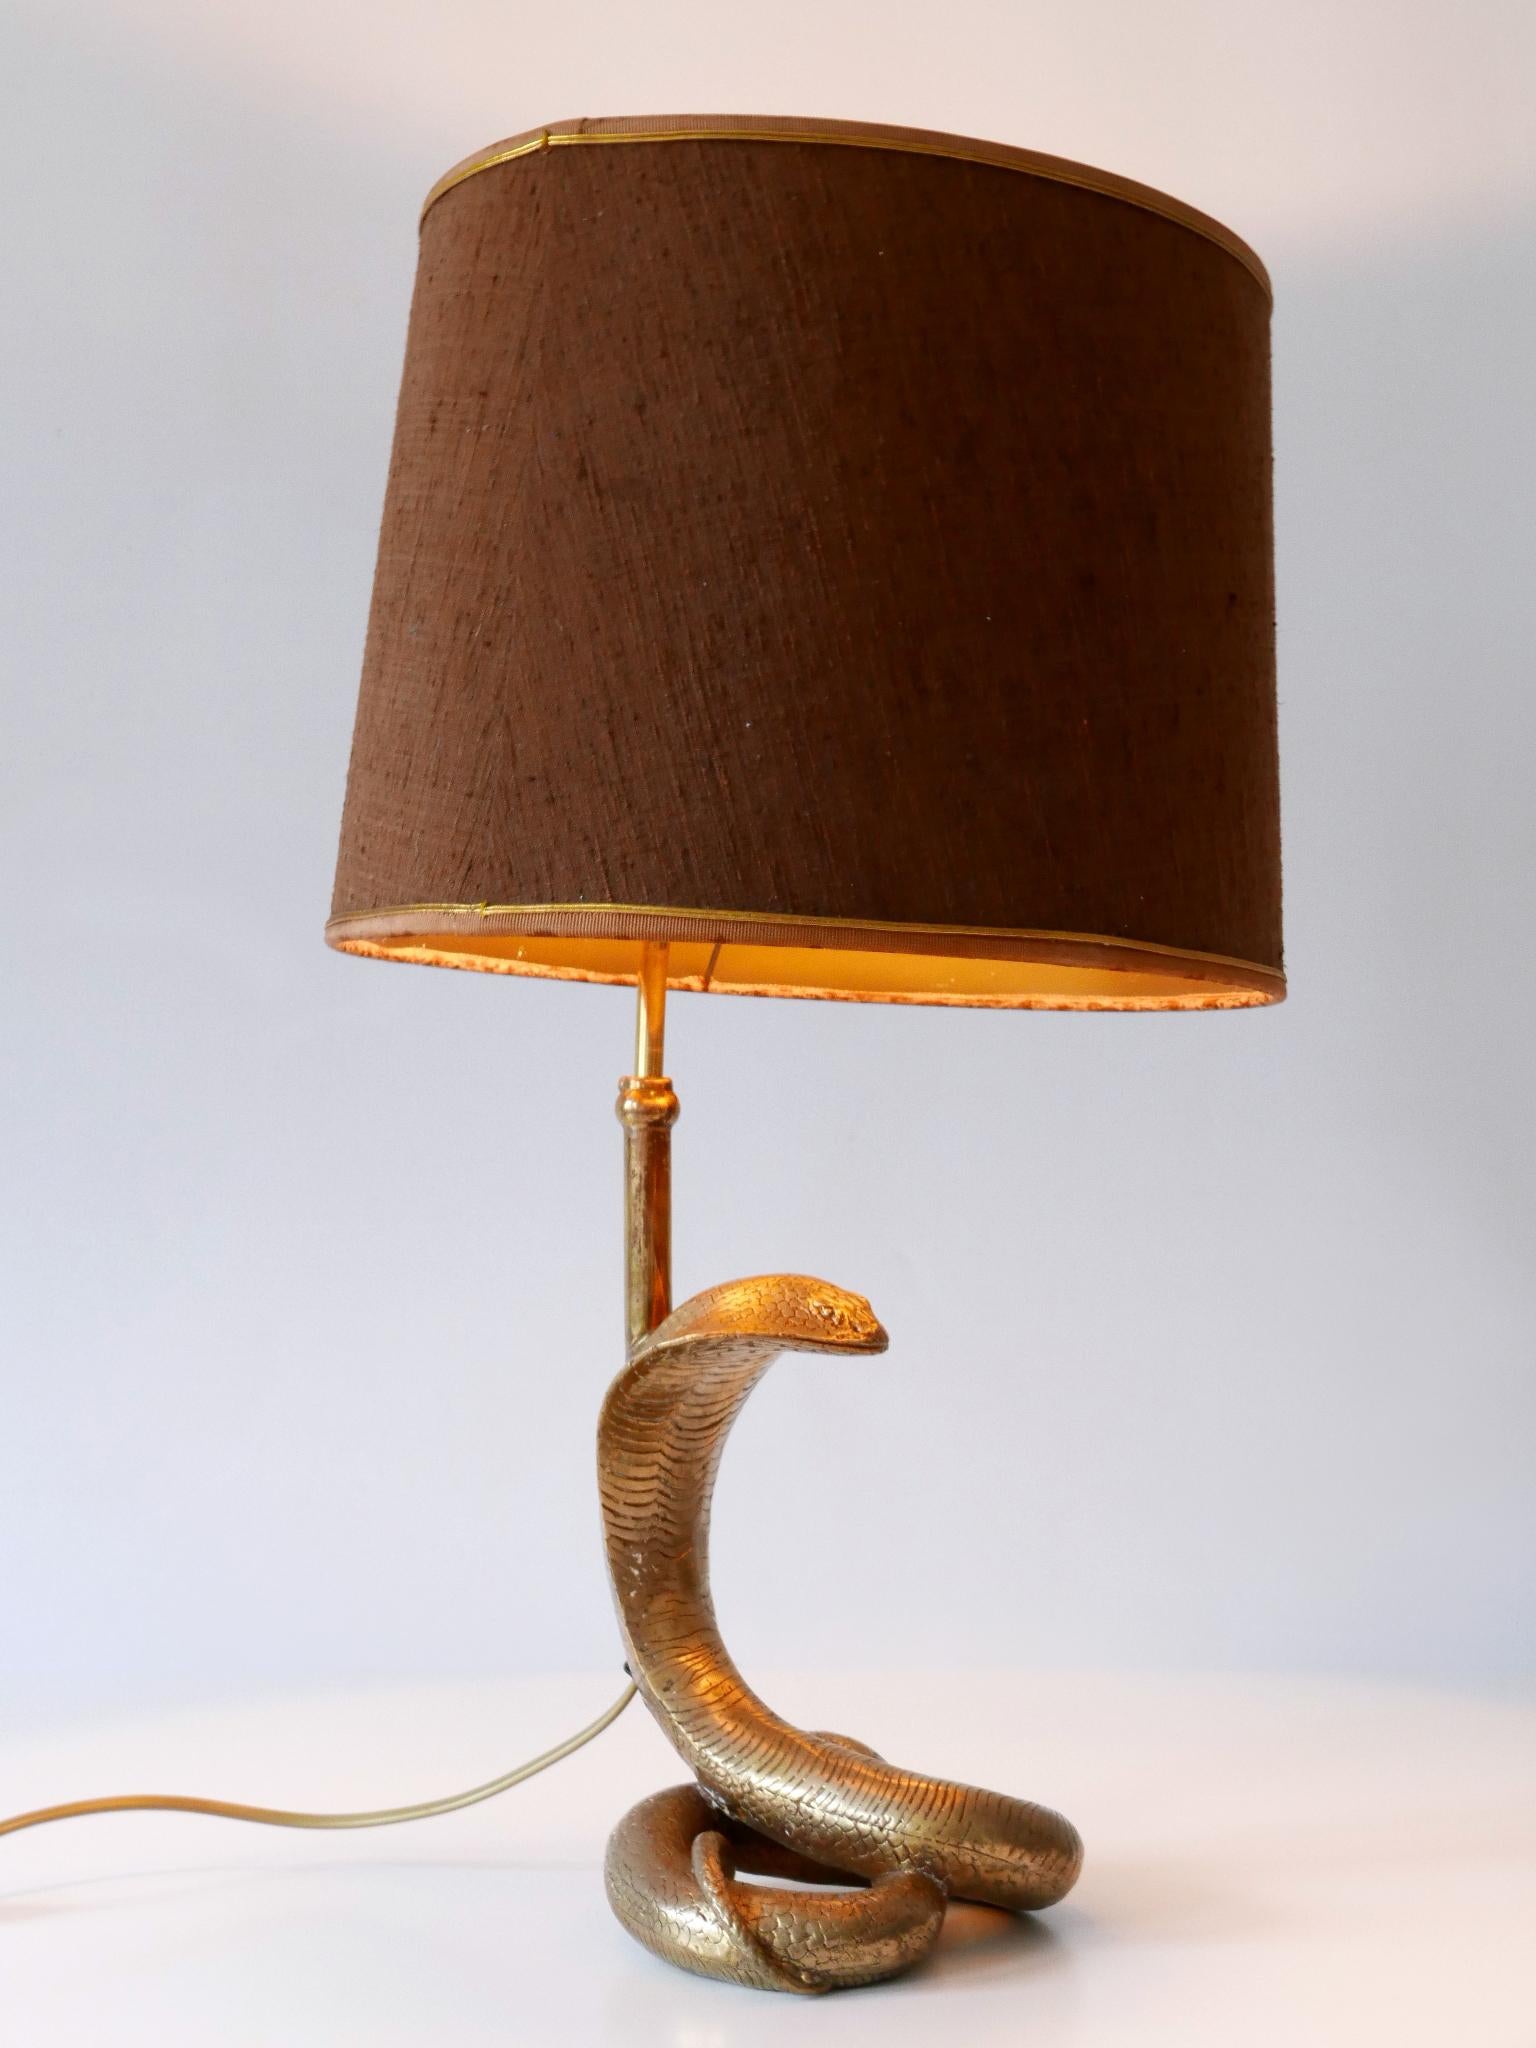 Exceptional Mid-Century Modern Cobra Table Lamp by Maison Jansen France 1970s In Good Condition For Sale In Munich, DE